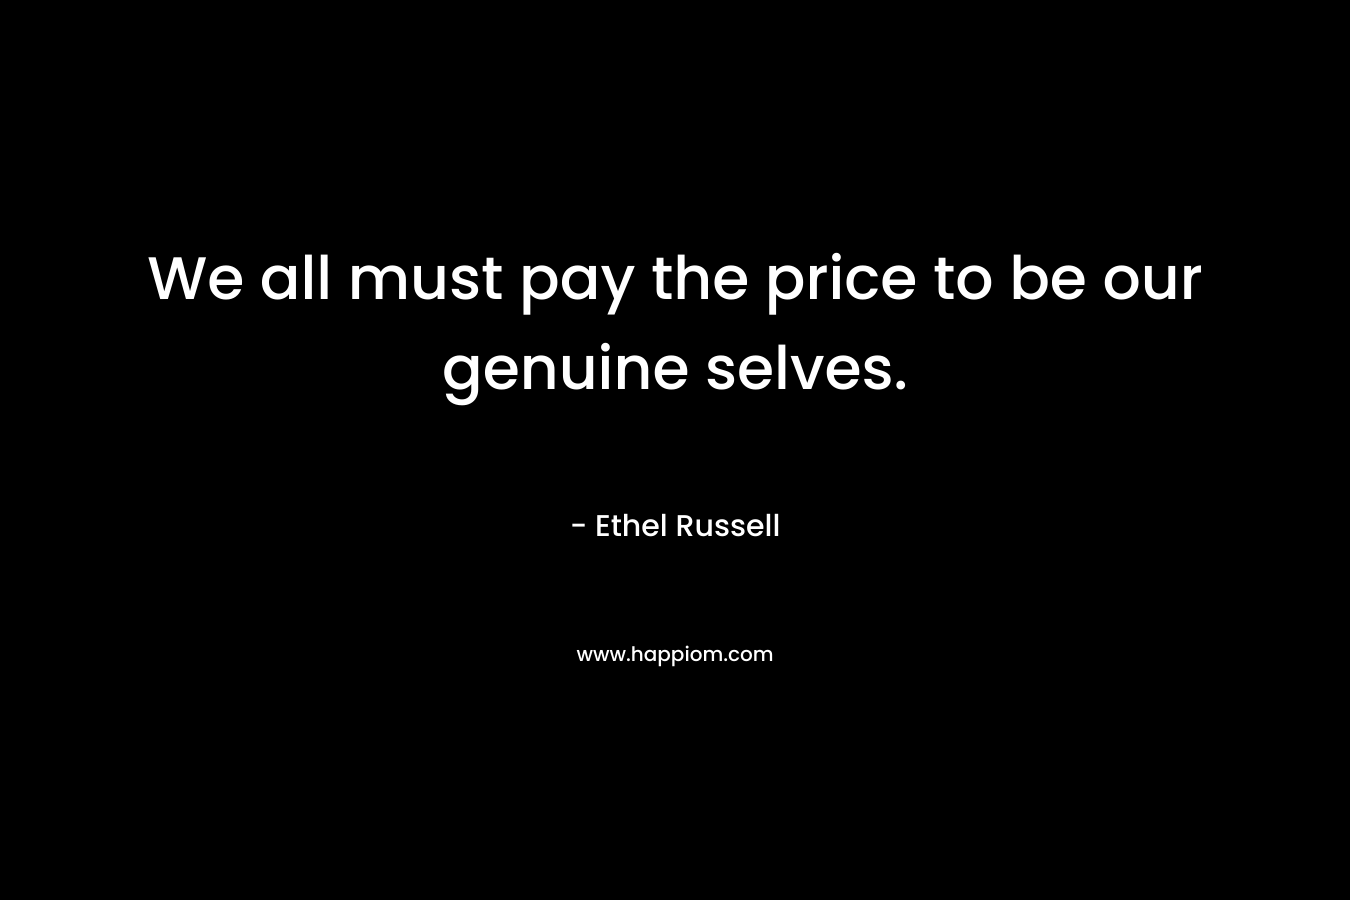 We all must pay the price to be our genuine selves.